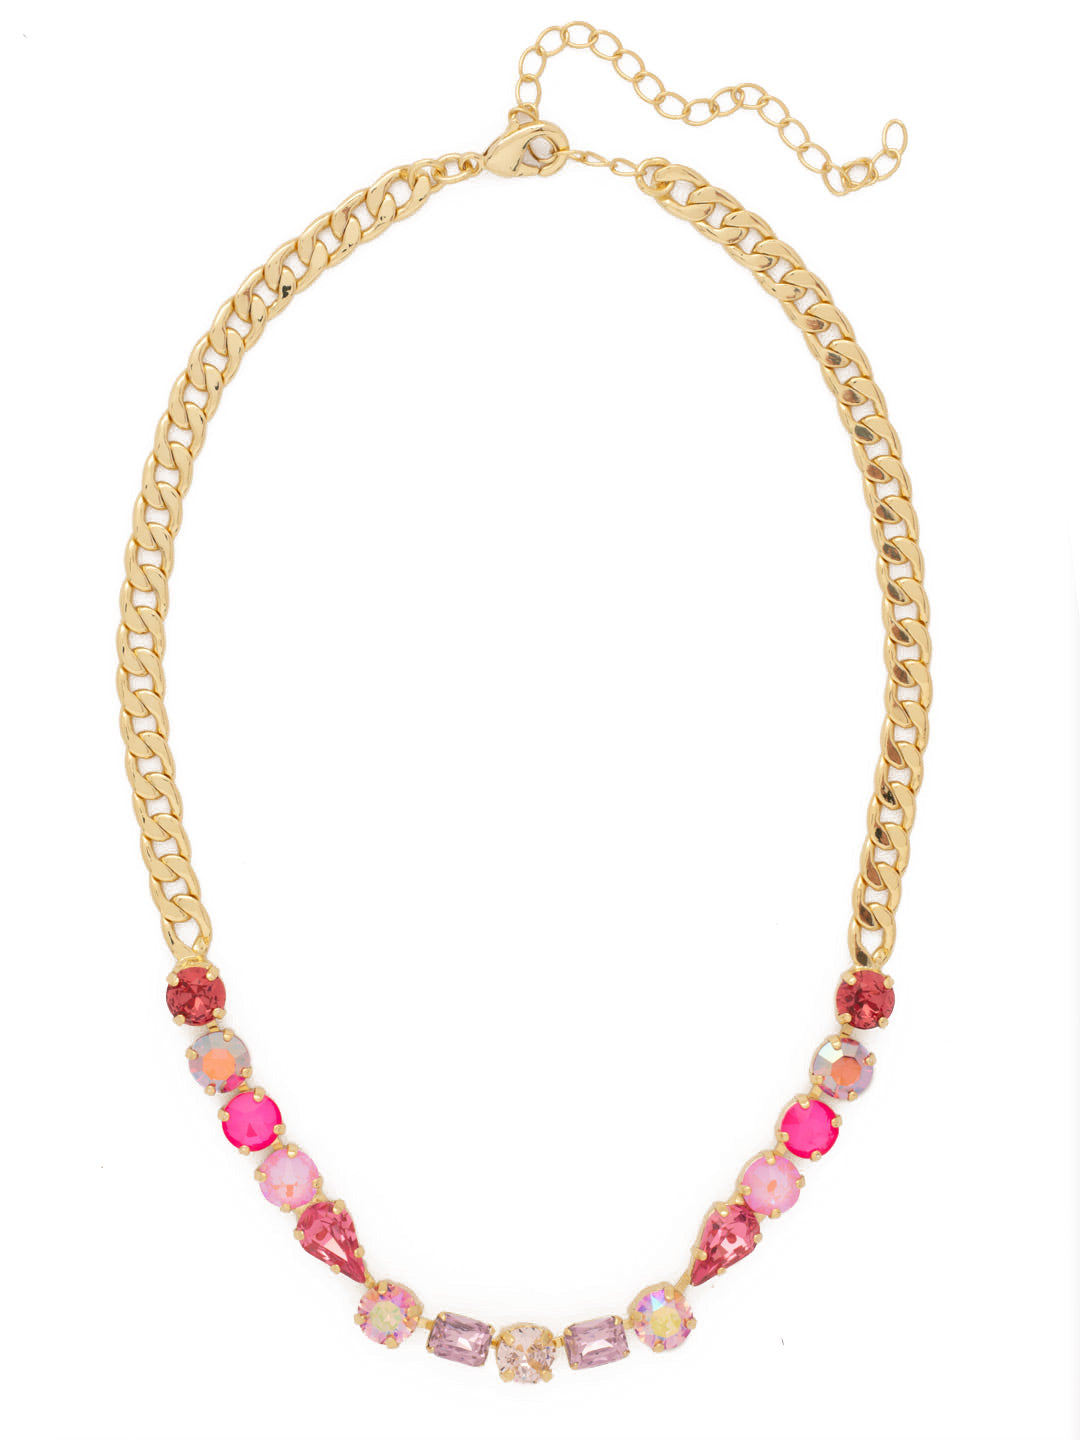 Kayla Tennis Necklace - NFN9BGBFL - <p>The Kayla Tennis Necklace features a half line of assorted round, emerald, and pear-cut crystals on an adjustable chain, secured with a lobster claw clasp. From Sorrelli's Big Flirt collection in our Bright Gold-tone finish.</p>